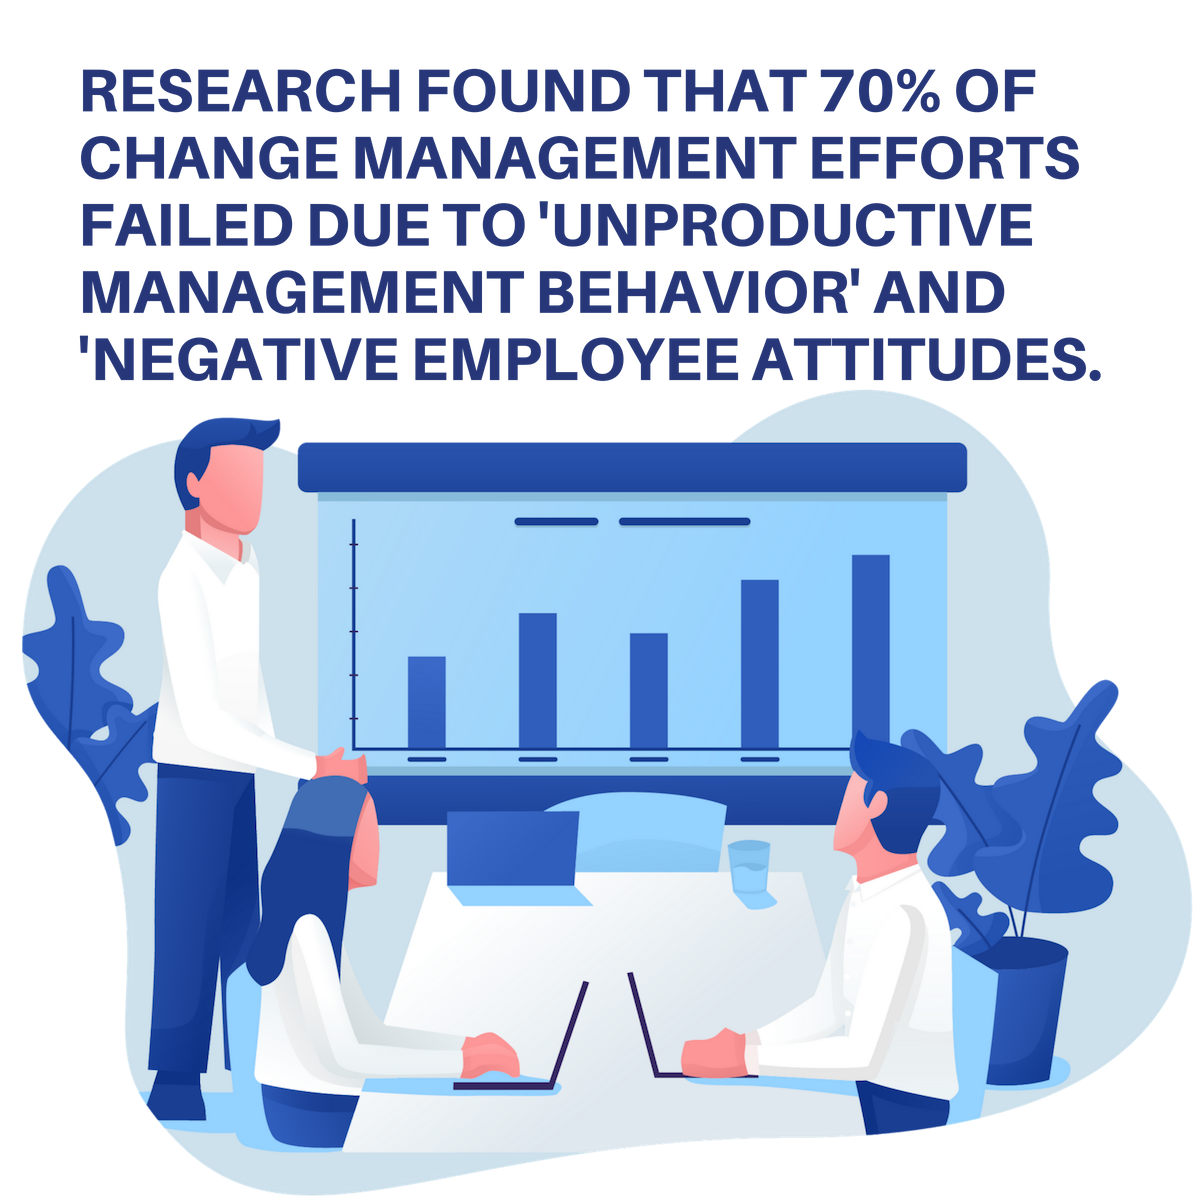 Research found that 70% of change management efforts failed due to 'unproductive management behavior' and 'negative employee attitudes'